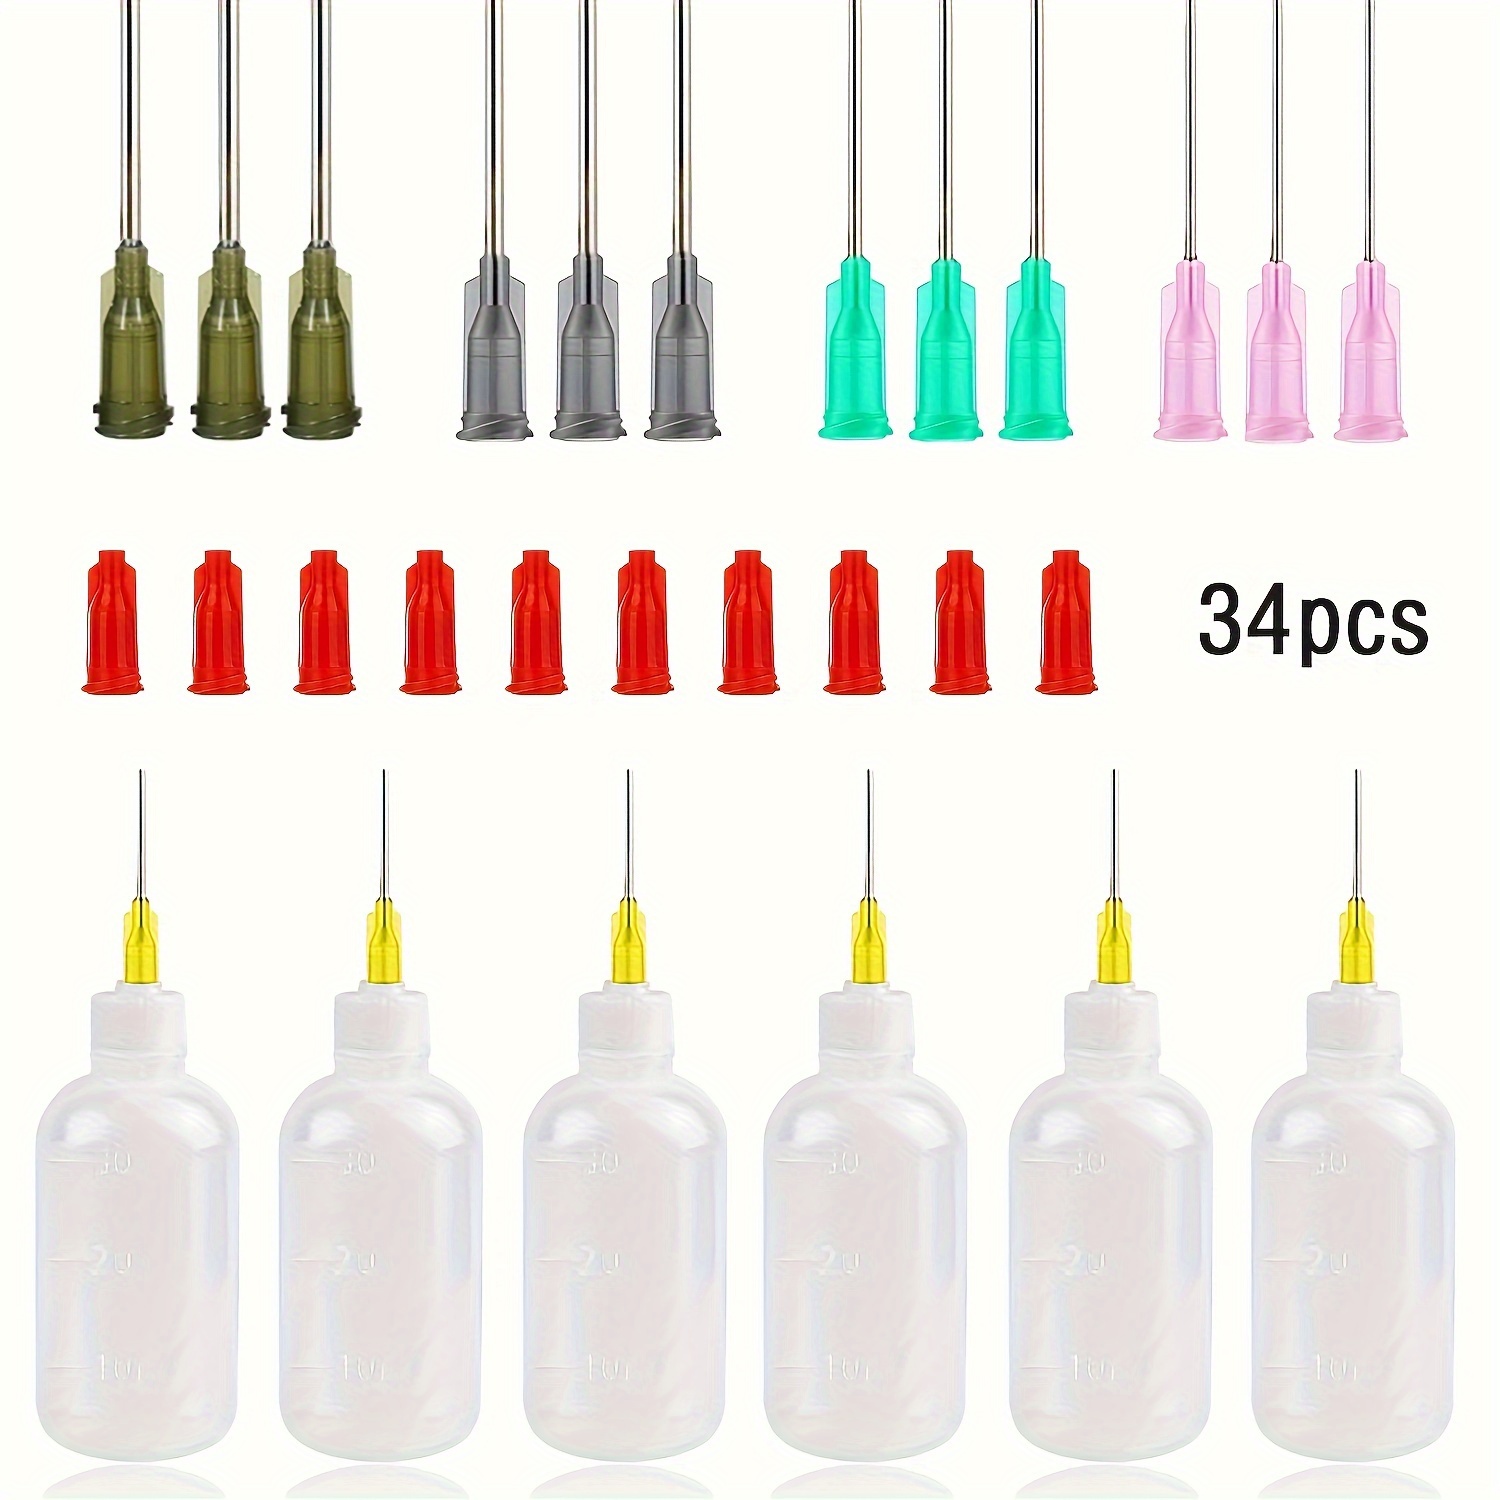 

34pcs Glue Applicator Bottles Set, 30ml Plastic Squeezable Dropper Bottles With Blunt Needle Tip 14ga 16ga 18ga 20ga For Glue Applications, Paint Quilling Craft And Oil